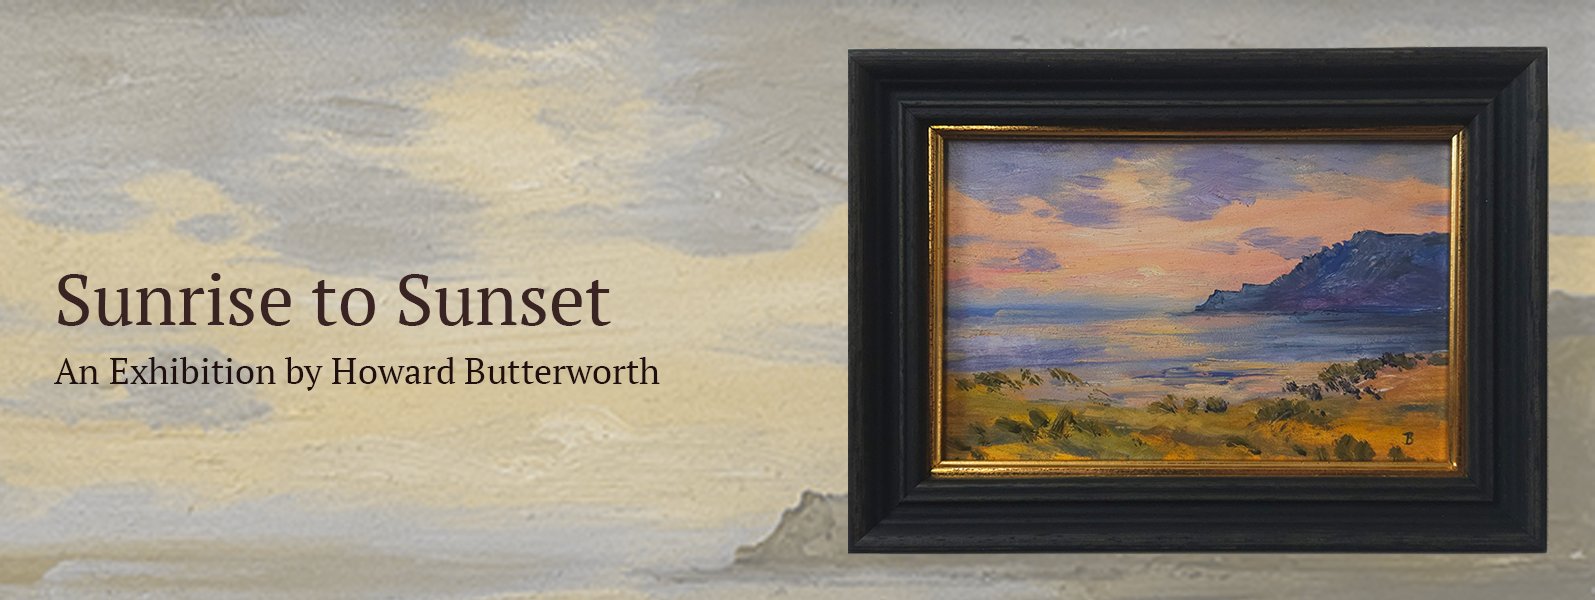 Sunrise to Sunset - An Exhibition by Howard Butterworth